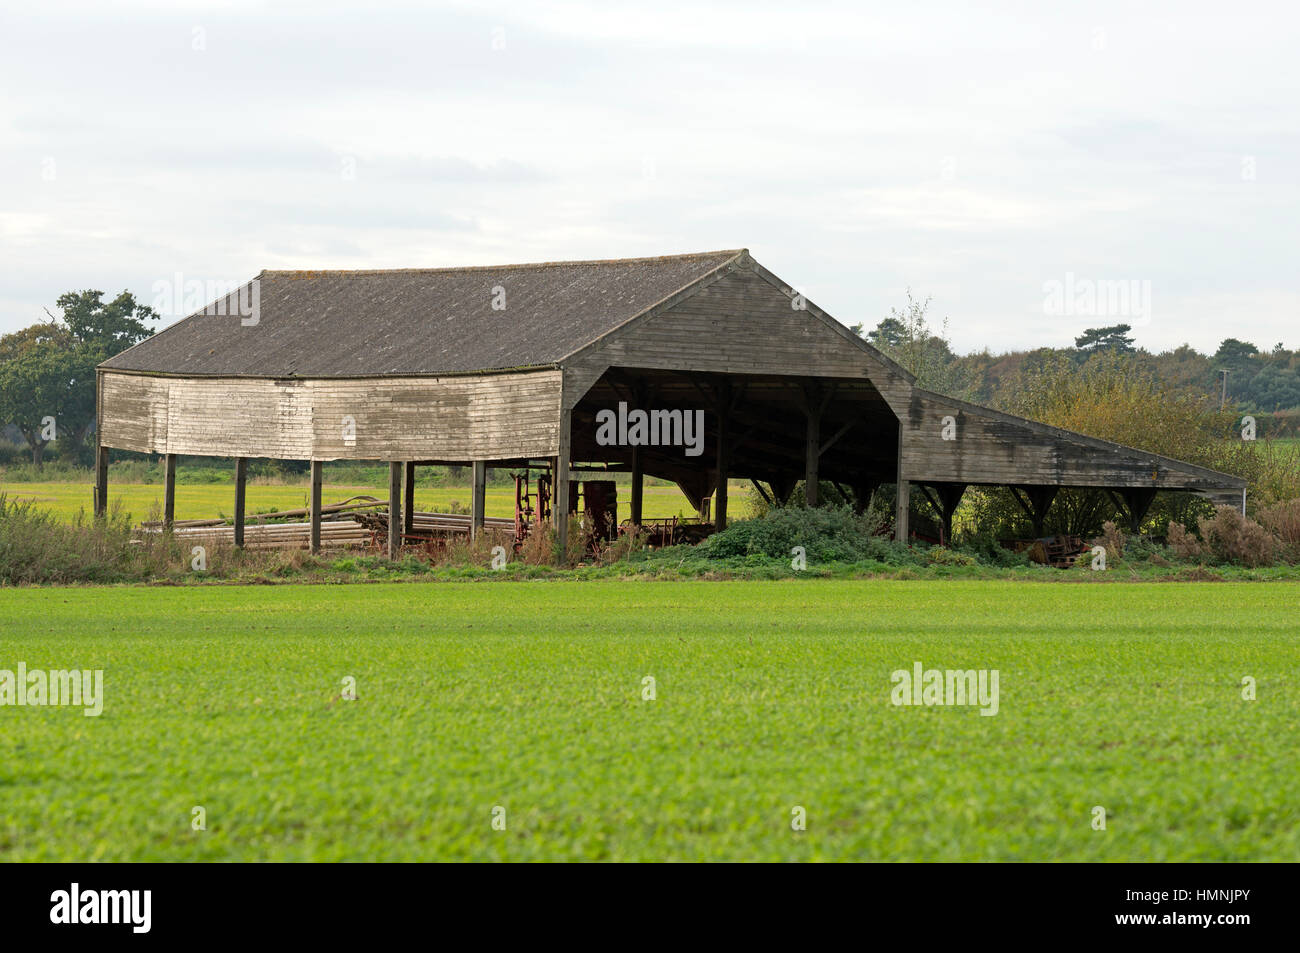 Traditional wooden Dutch barn with corrugated asbestos roof, Ramsholt, Suffolk, UK. Stock Photo